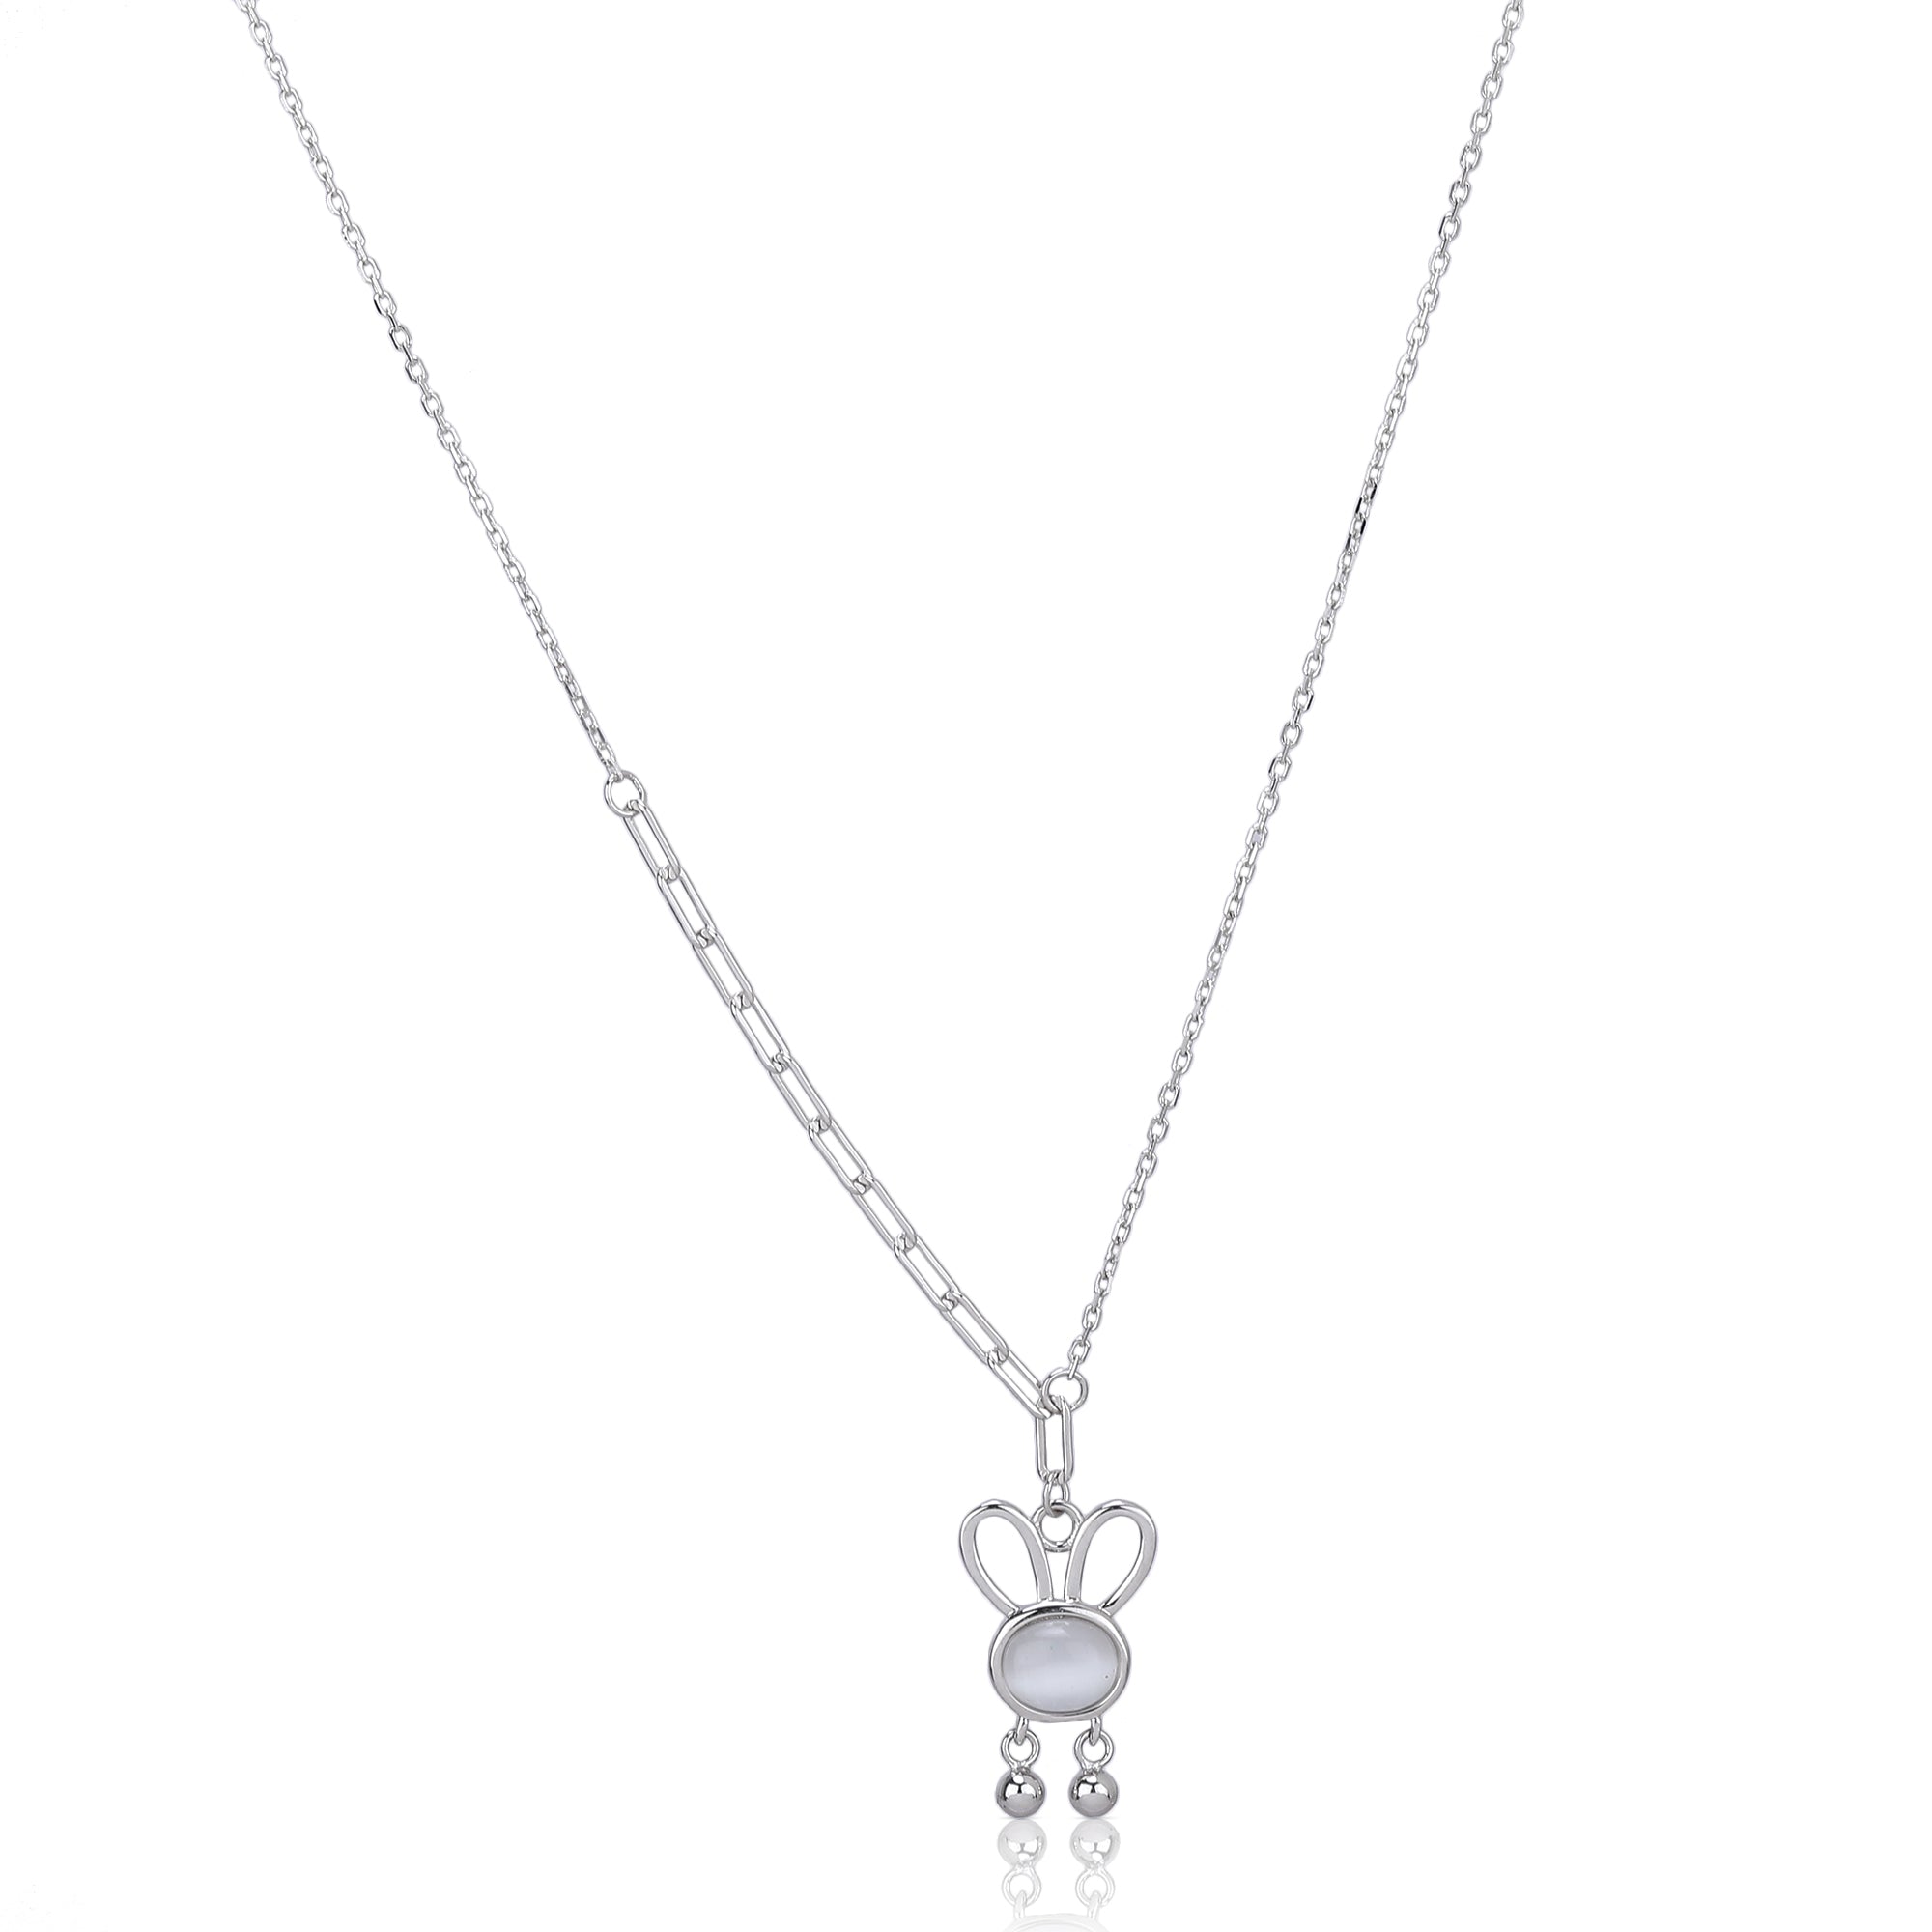 Silver rabbit pendant with chain